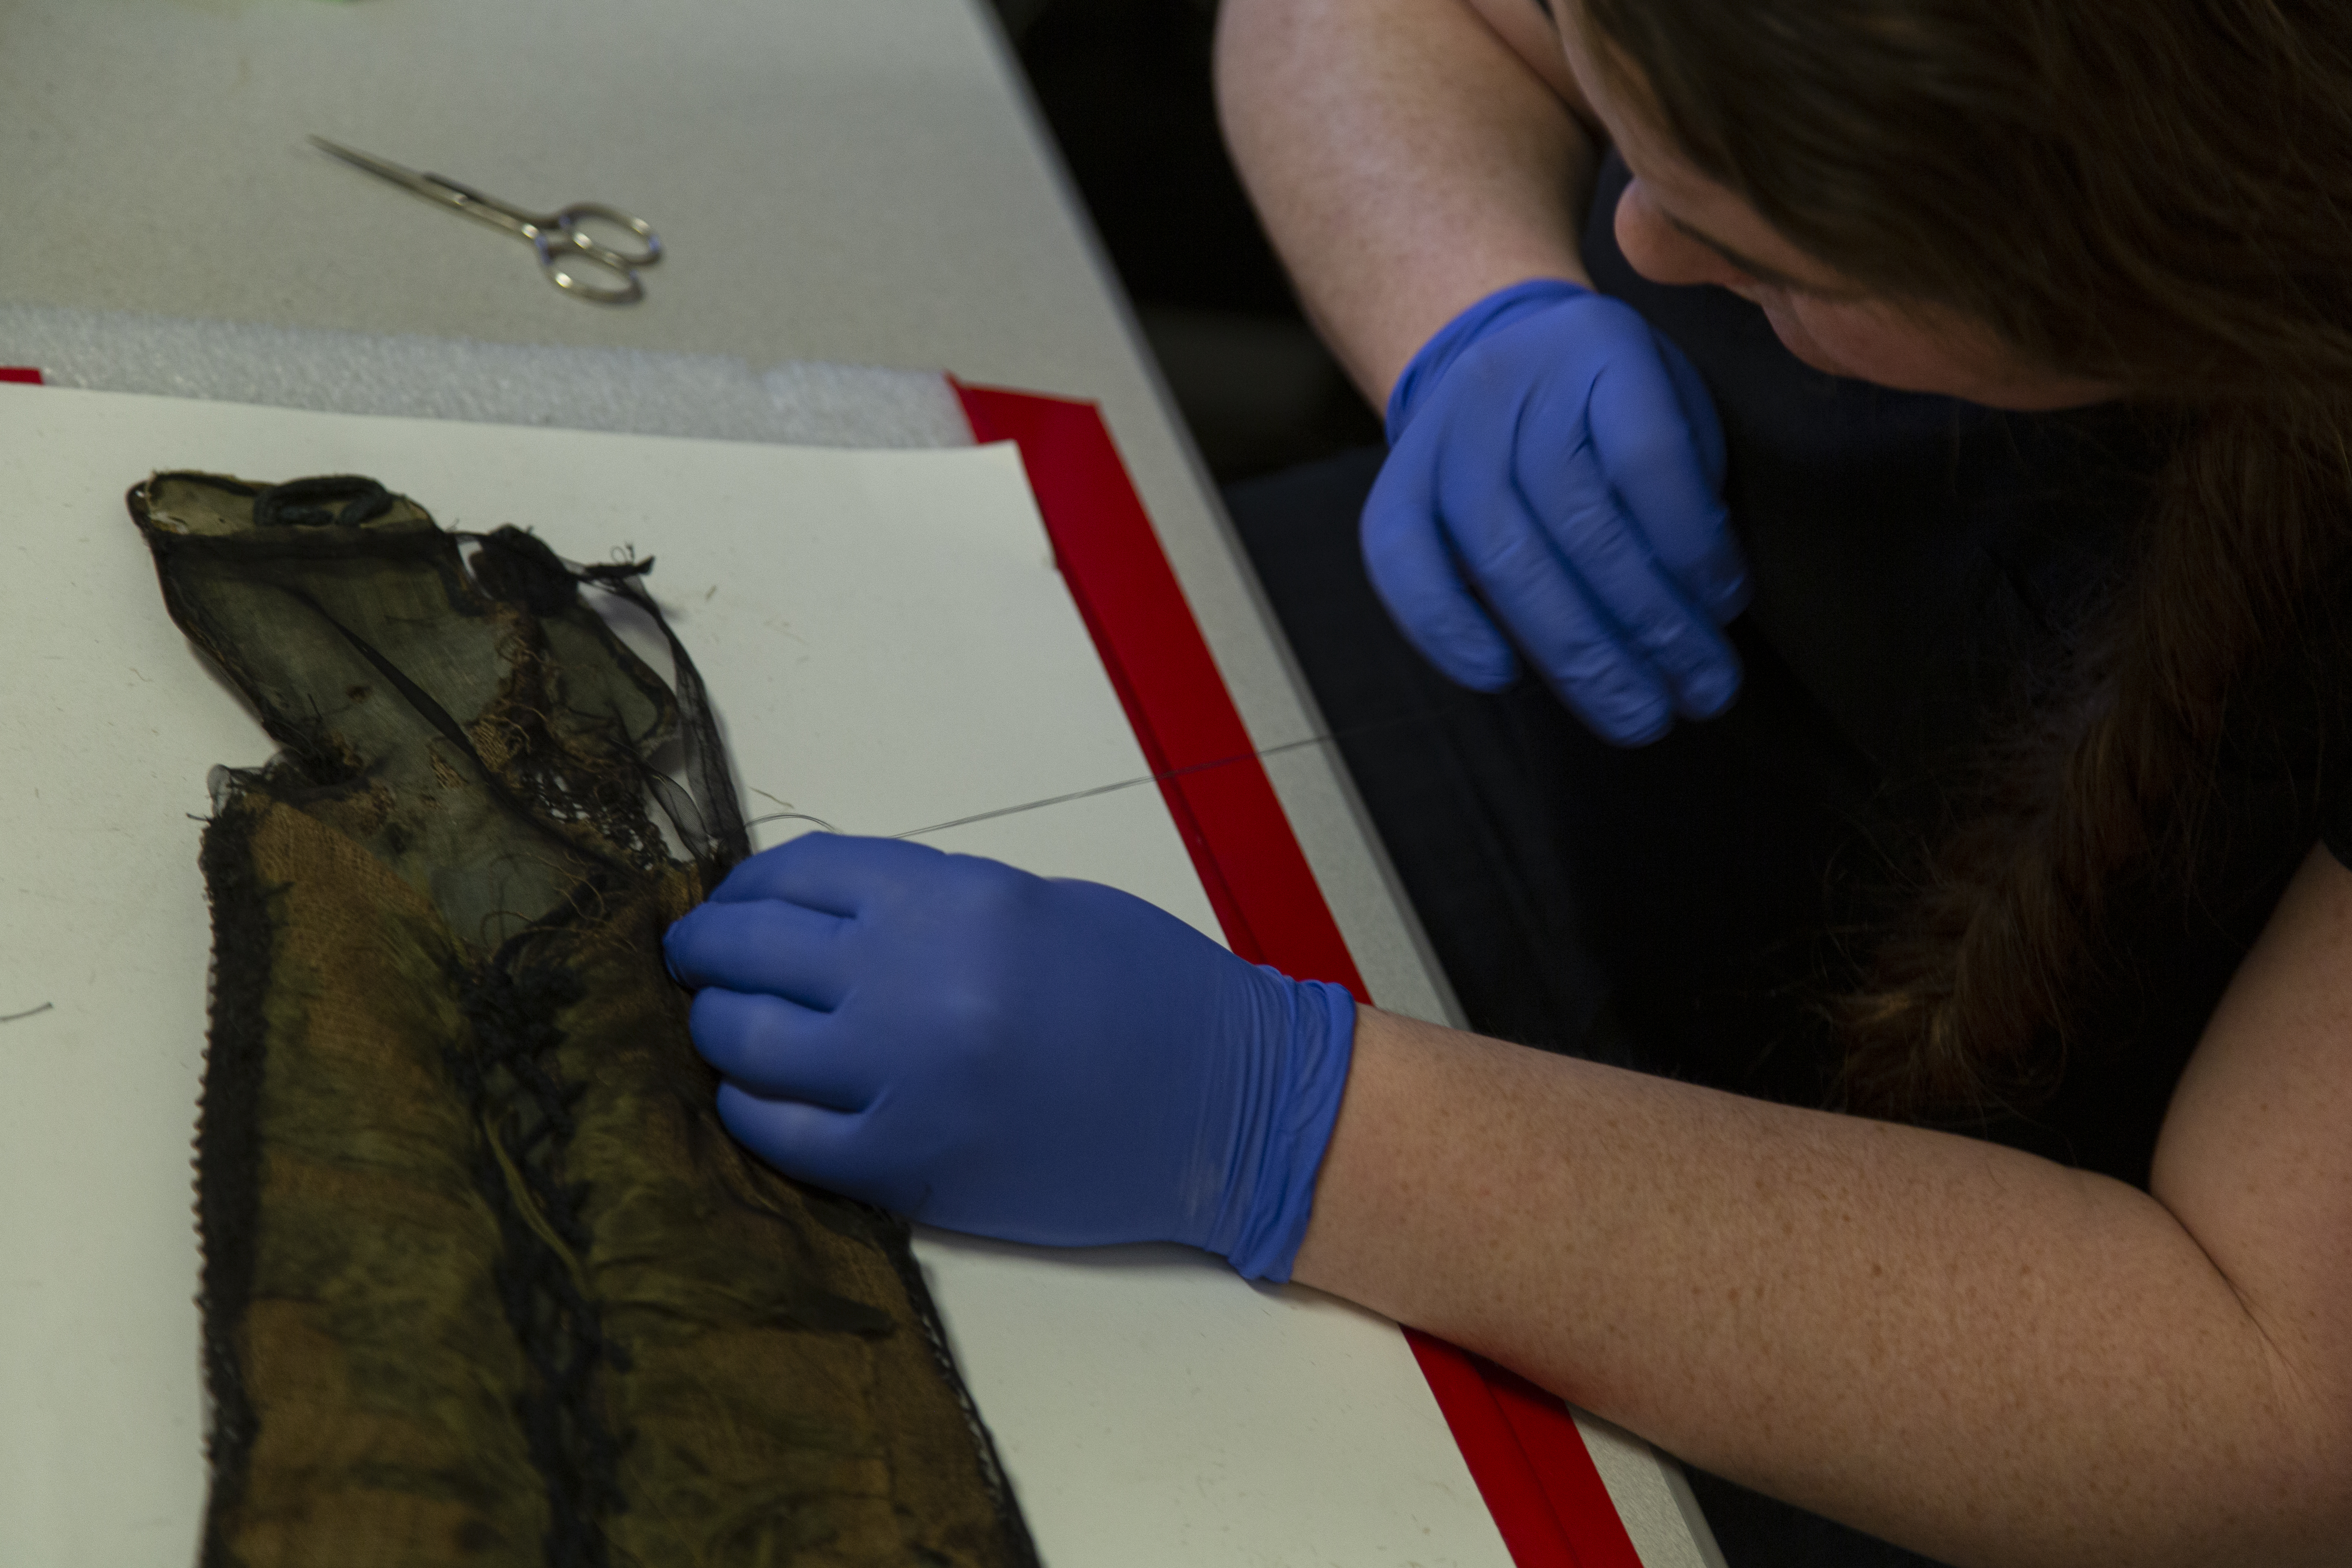 Adelaide Ryder, Collection’s staff member, attaches a layer of silk to the underside of the Samurai Armor sleeve to contain the deteriorated silk and paper.